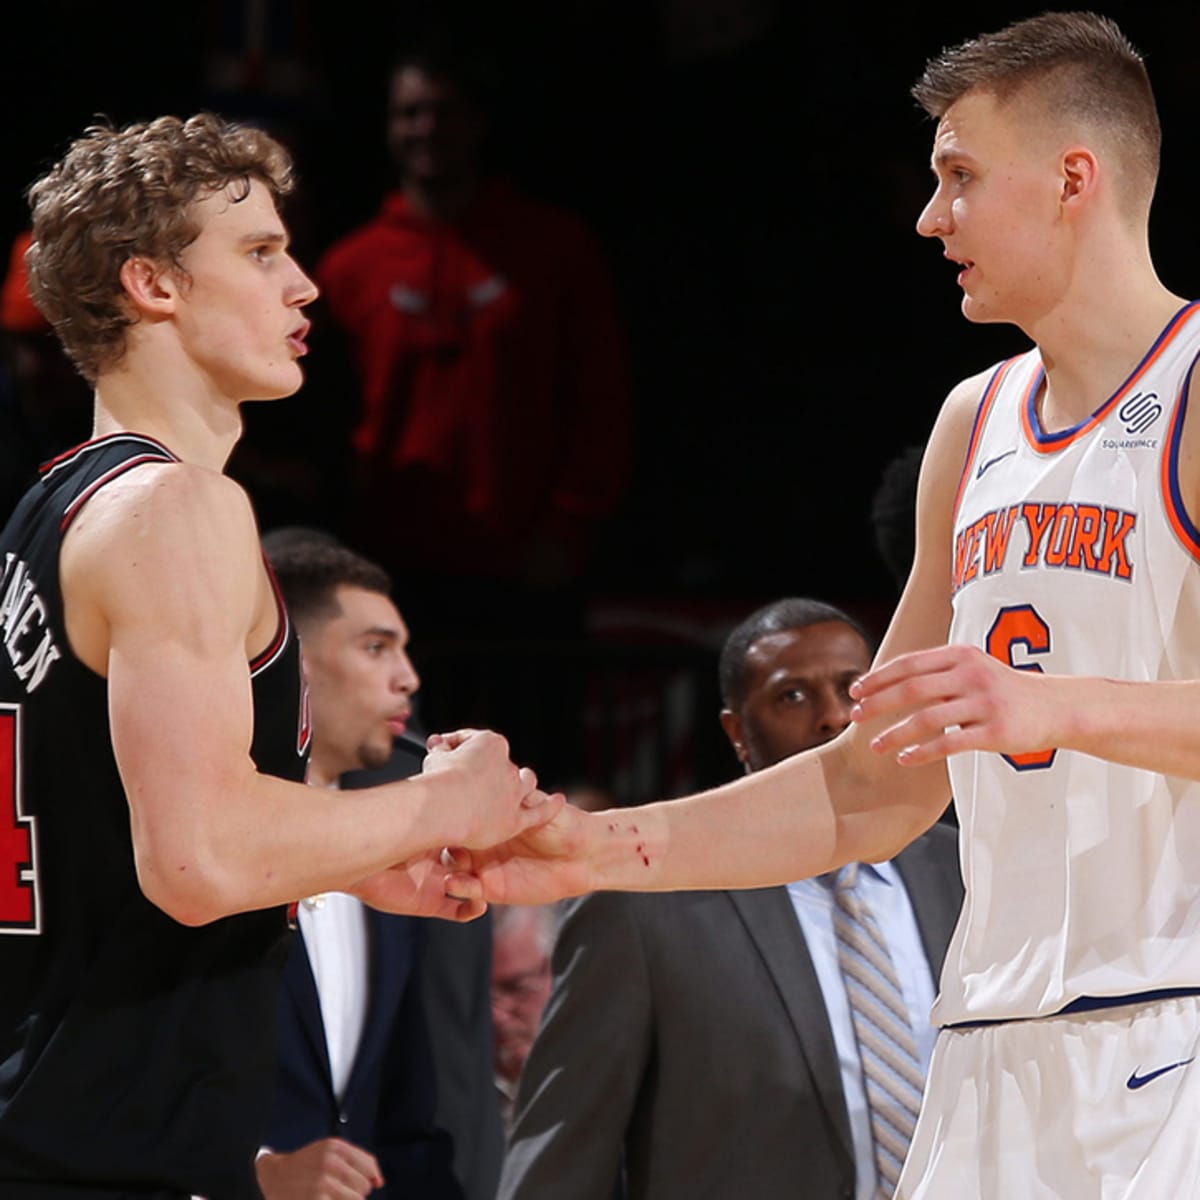 What Position Does Lauri Markkanen Play?